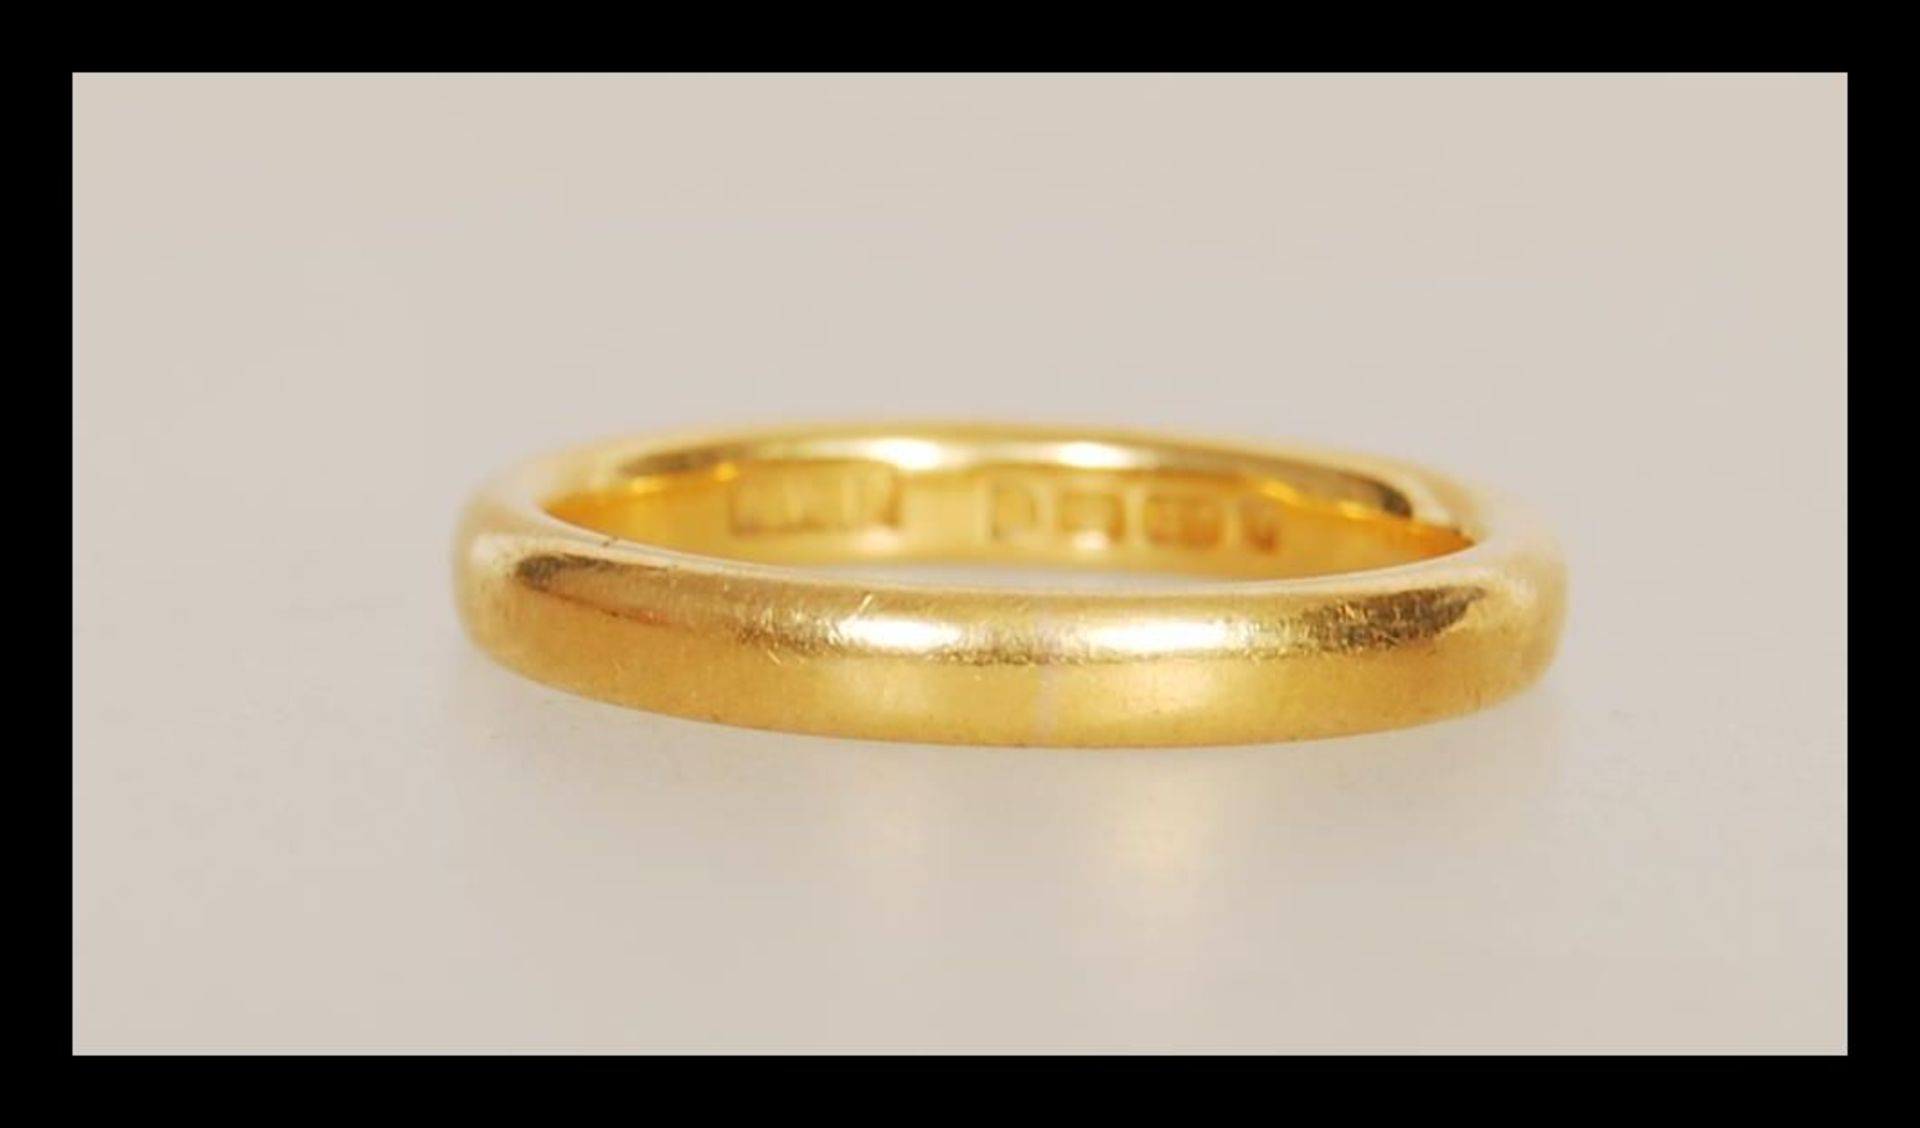 A 22ct gold wedding band ring having hallmarks for London dating 1939 and stamped W.W.Ld. Weight 3.